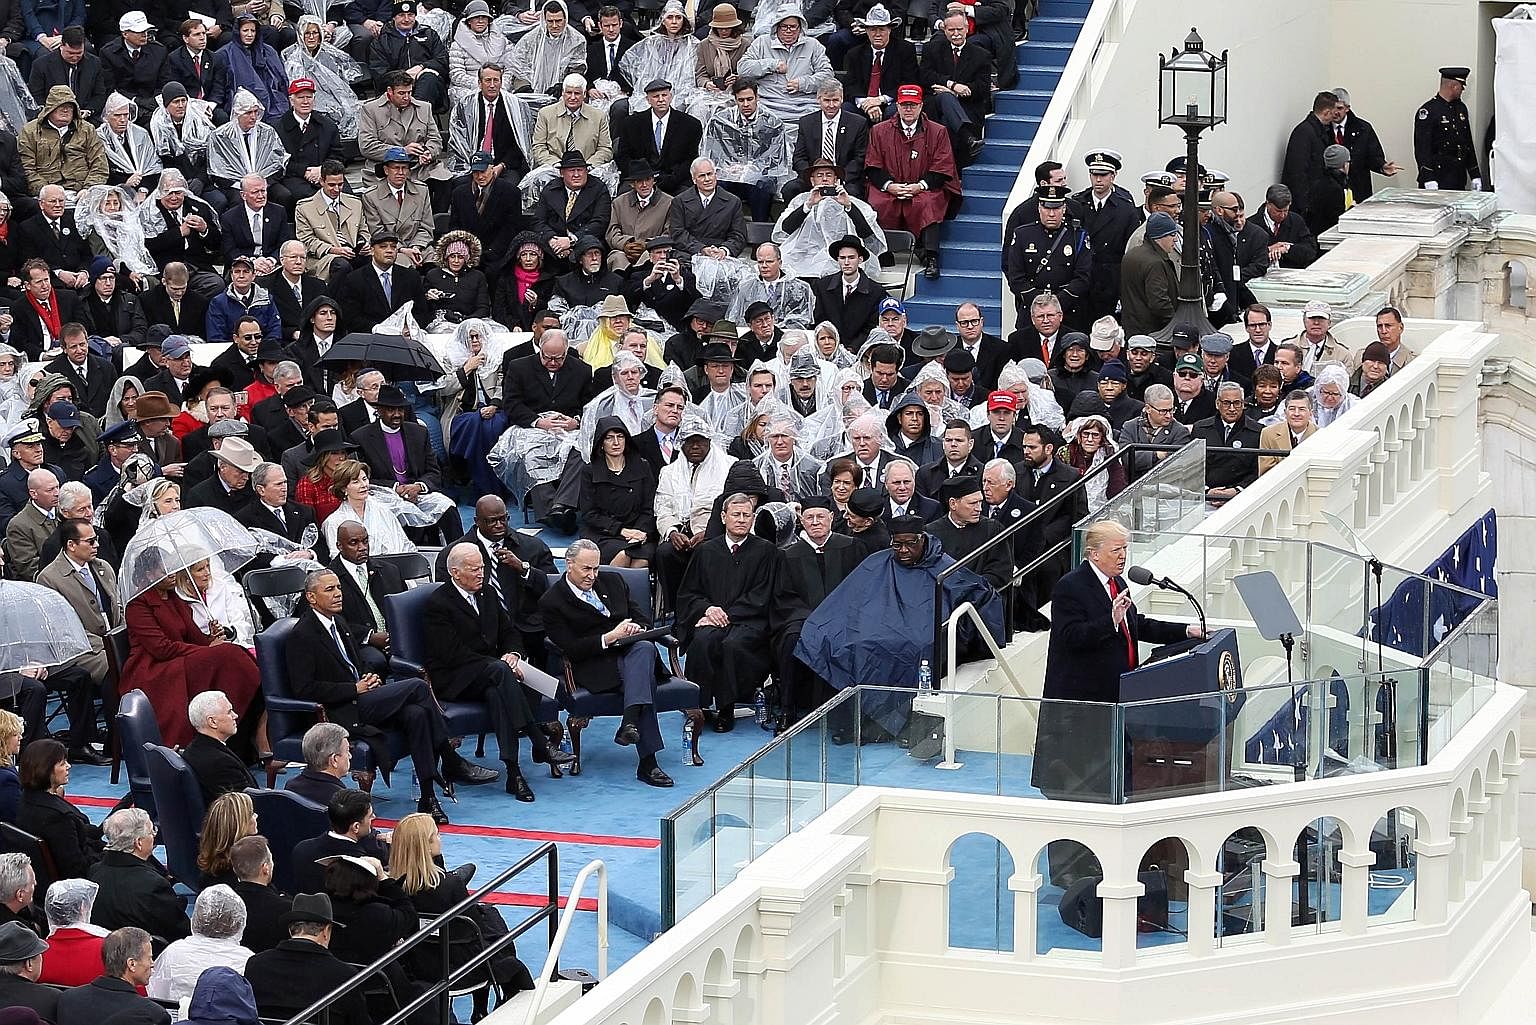 US President Donald Trump delivering his inaugural address in Washington on Jan 20 last year. The writer, an imam at the Islamic Institute of Orange County, says the past year has not always been easy, but during challenging times, he reminds his com